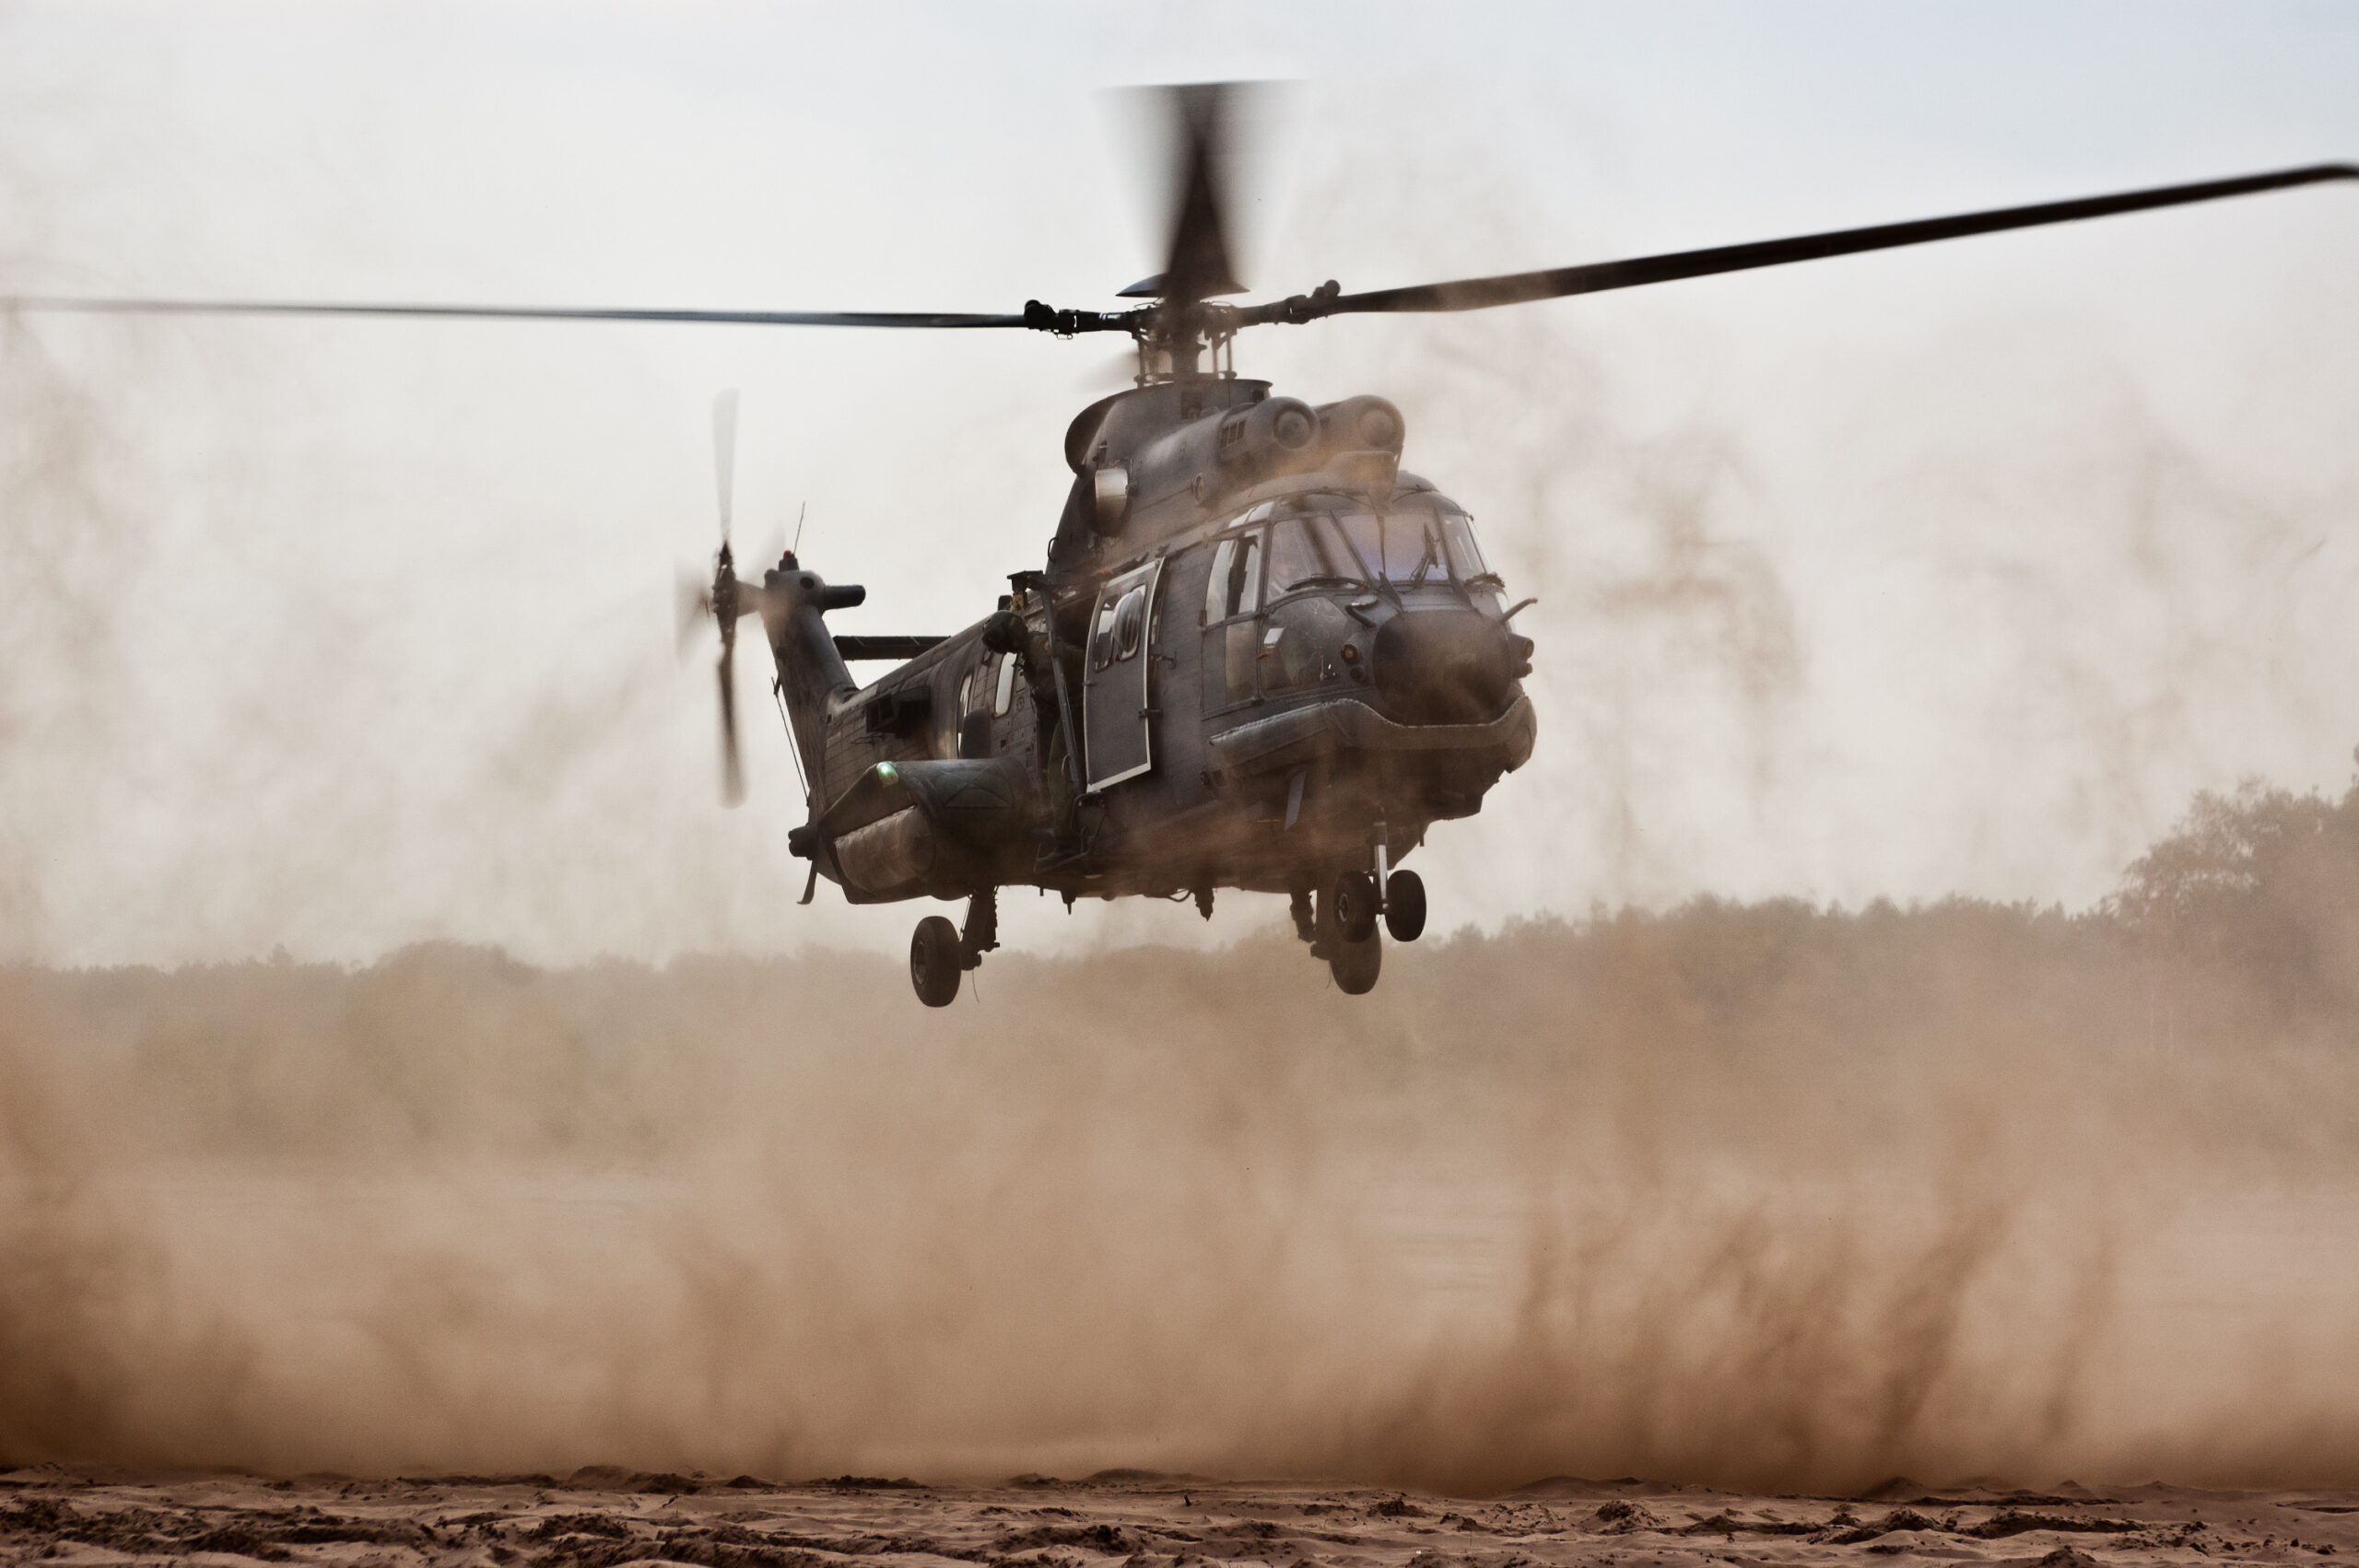 <p>When troops use smoke to signal a helicopter’s arrival, it’s referred to as “Pop smoke.” In military vernacular, this term means to leave quickly or in a hurry.</p>